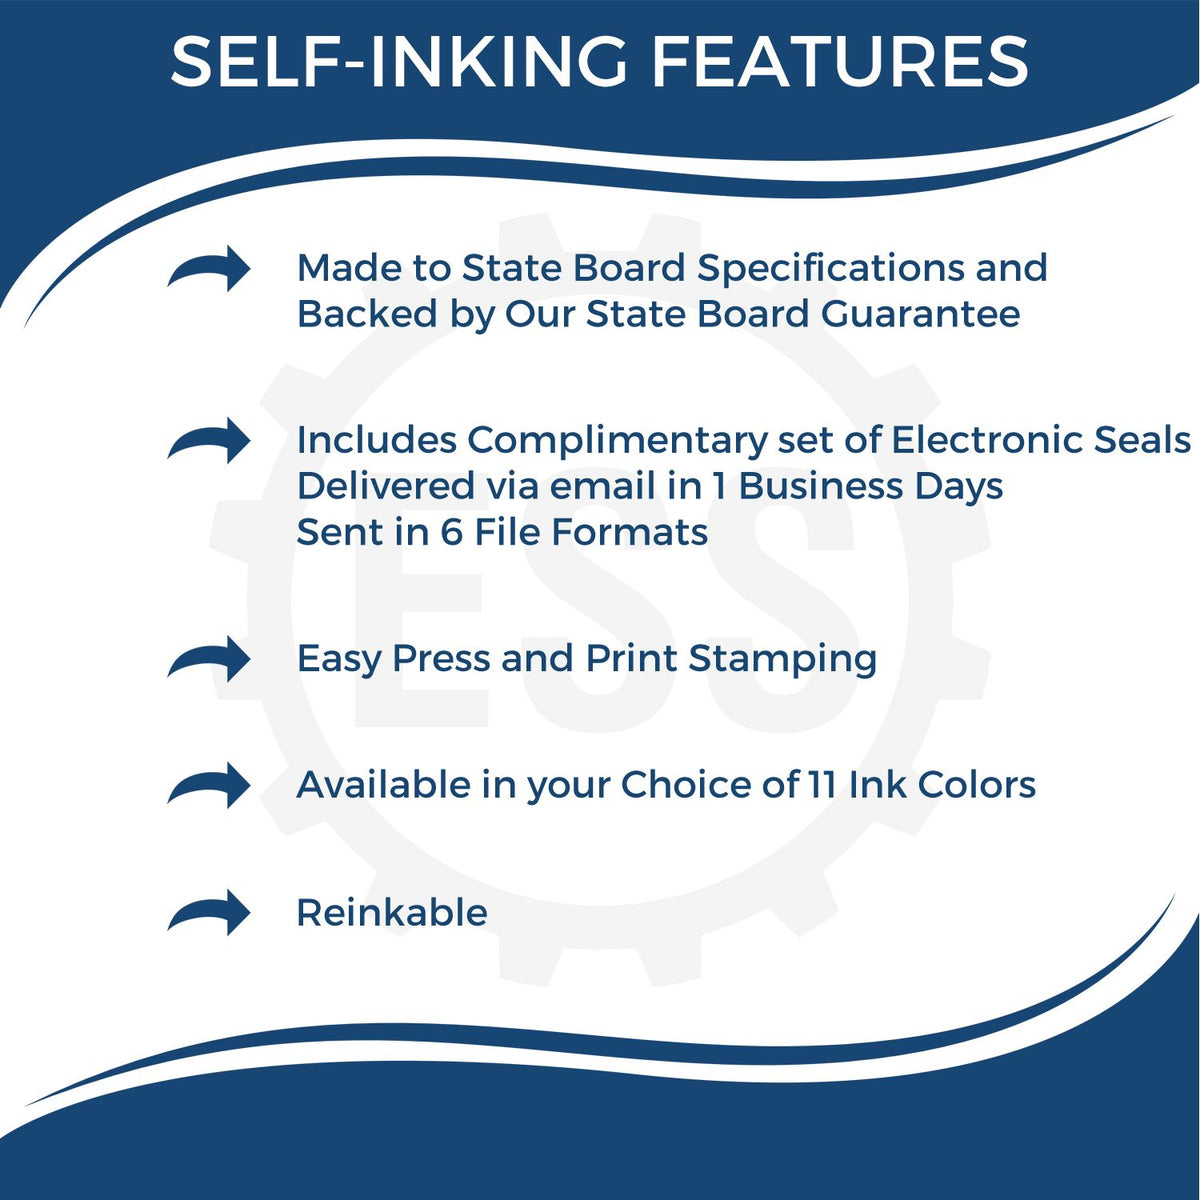 A picture of an infographic highlighting the selling points for the Self-Inking Rhode Island Landscape Architect Stamp